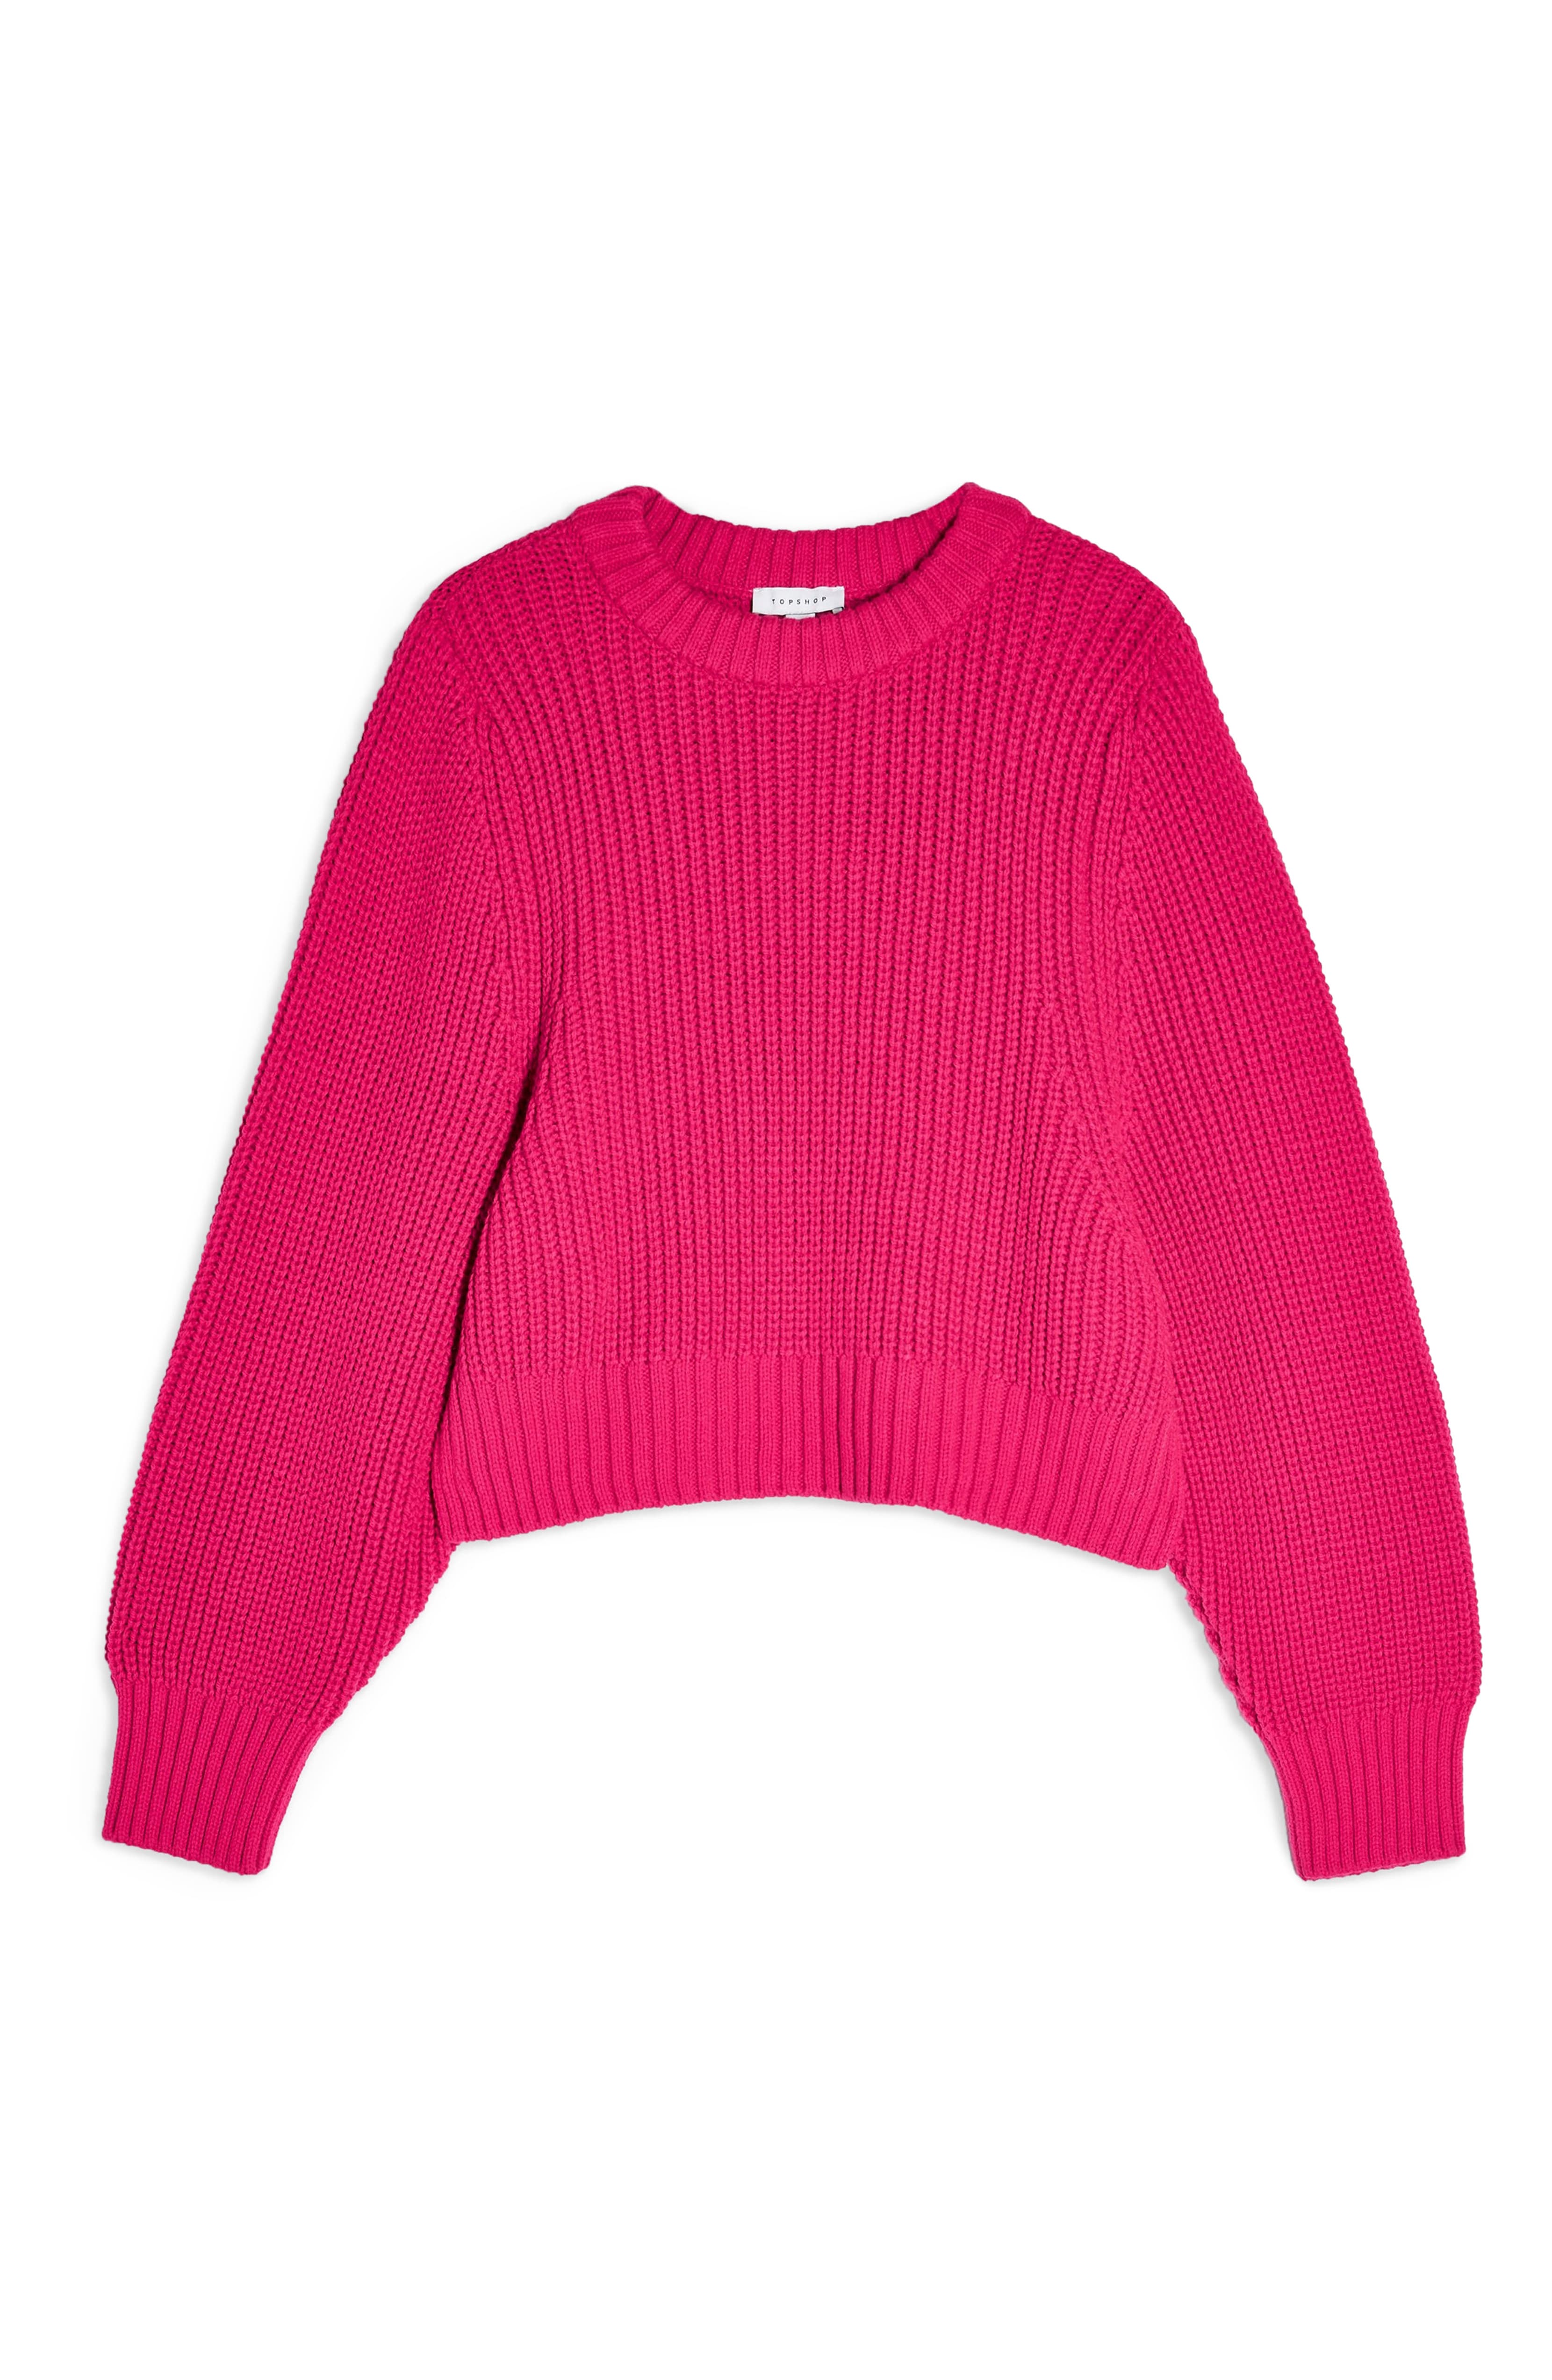 How To Inject This Haute Hue Into Your Fall Wardrobe